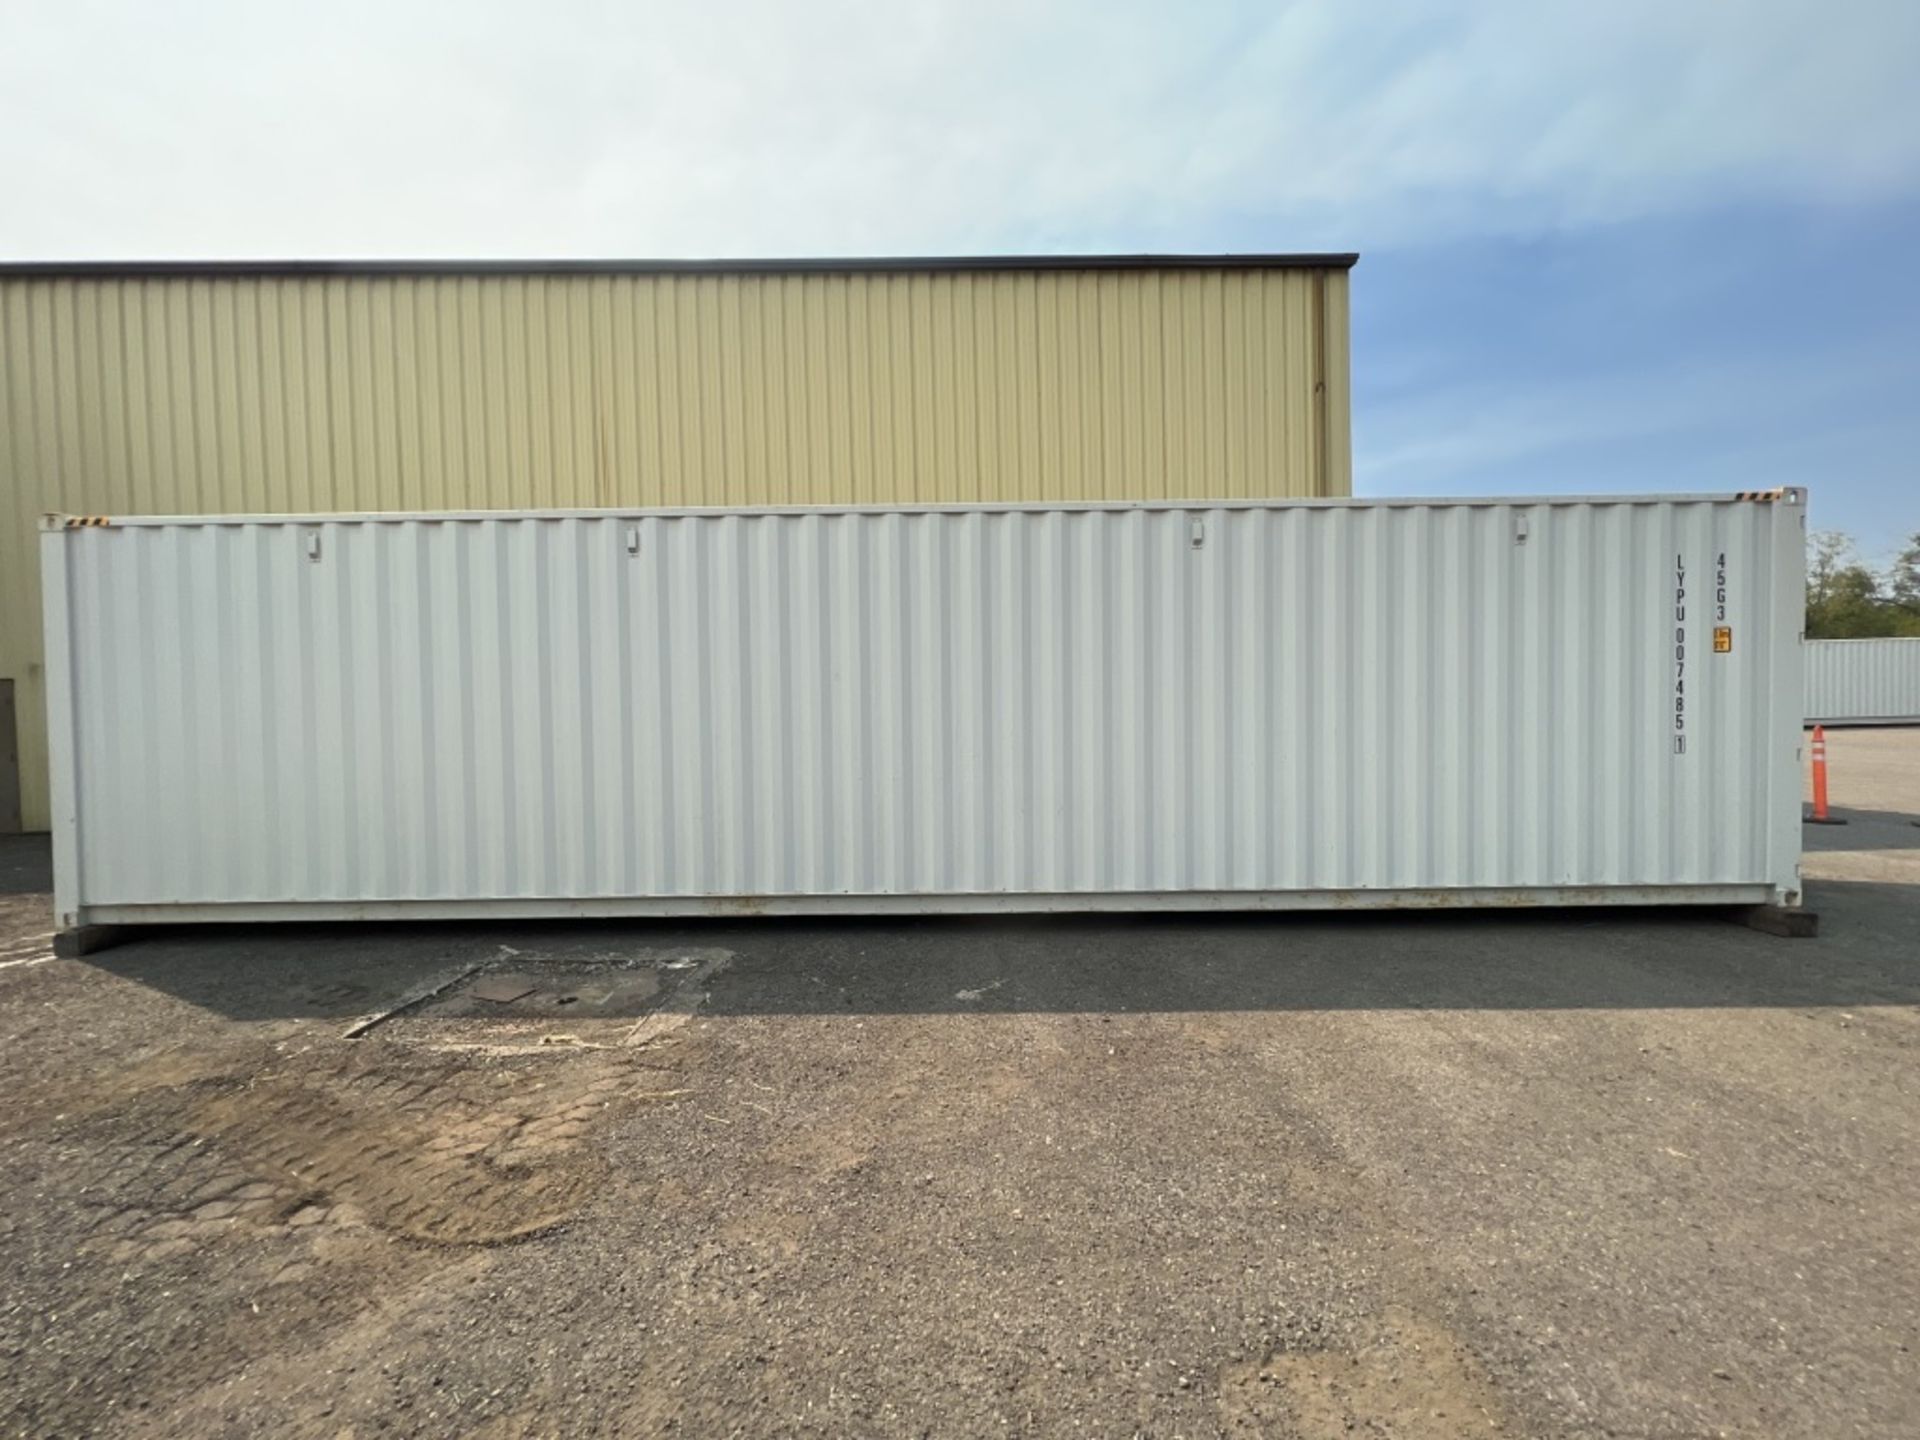 2022 40' High Cube Shipping Container - Image 3 of 10